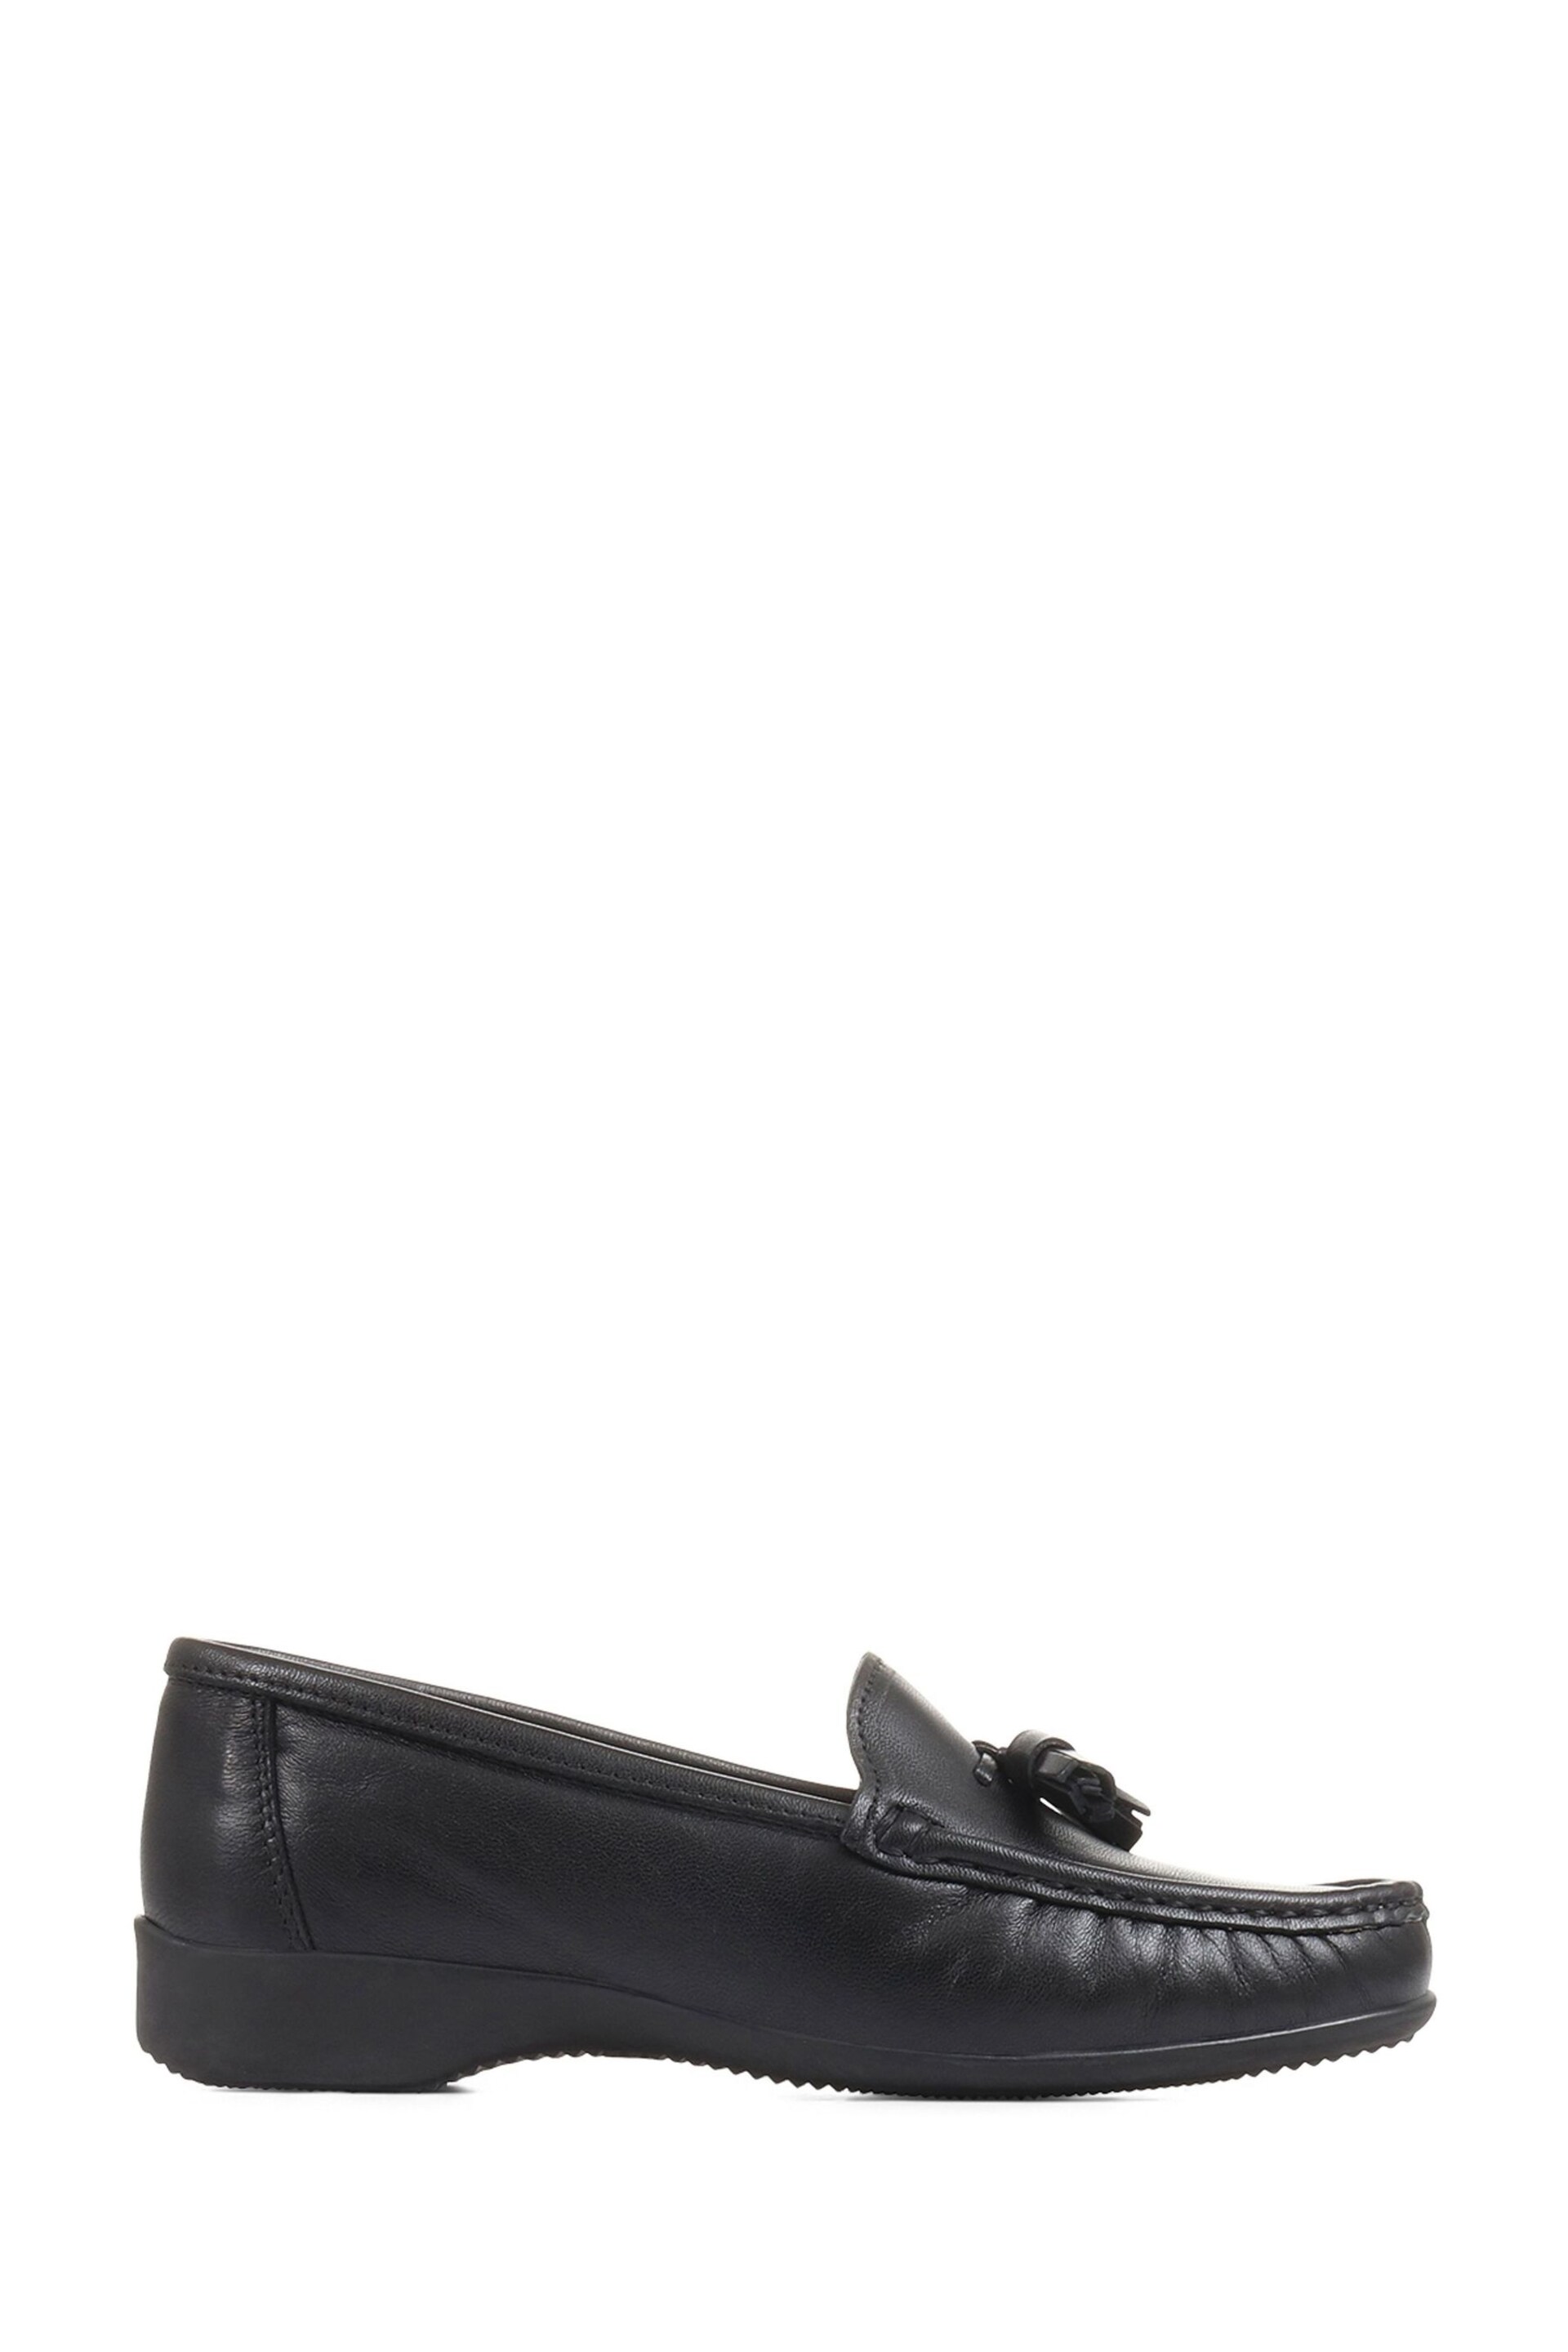 Pavers Wide Fit Black Leather Loafers With Tassel - Image 1 of 5